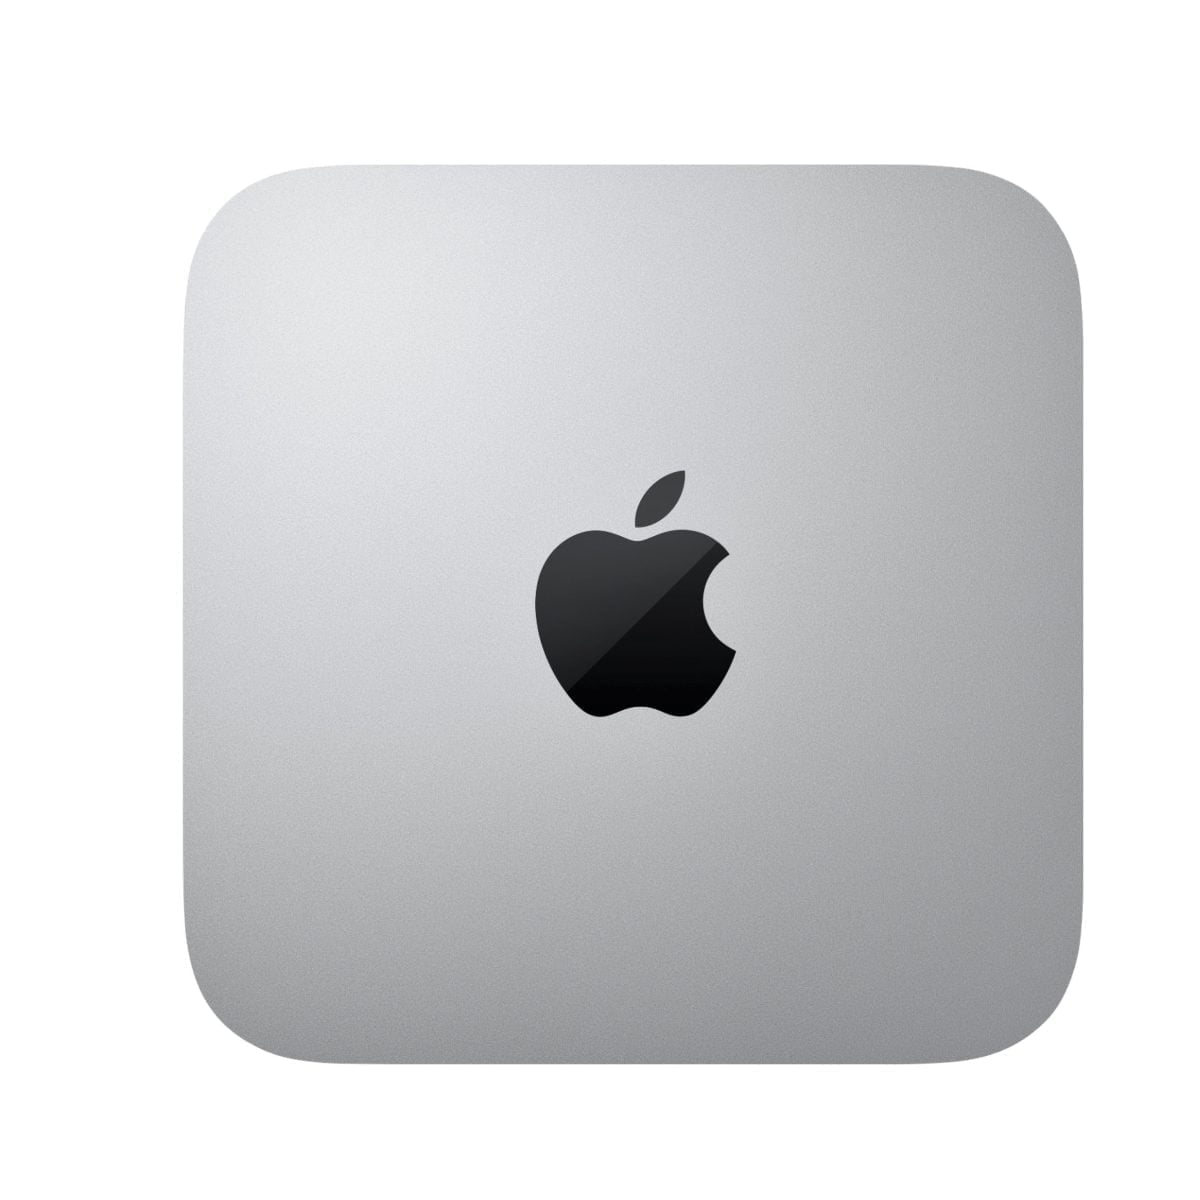 6427497Cv11D Scaled Apple &Lt;H1 Class=&Quot;Heading-5 V-Fw-Regular&Quot;&Gt;Mac Mini Desktop - Apple M1 Chip - 8Gb Memory - 256Gb Ssd (Latest Model) - Silver&Lt;/H1&Gt; Https://Www.youtube.com/Watch?V=3Oq__Scnyna Mac Mini, The Most Versatile, Do-It-All Mac Desktop, To A Whole New Level Of Performance. With Up To 3X Faster Cpu Performance, Up To 6X Faster Graphics, A Powerful Neural Engine With Up To 15X Faster Machine Learning, And Superfast Unified Memory — All In An Ultracompact Design.* So You Can Create, Work, And Play On Mac Mini With Speed And Power Beyond Anything You Ever Imagined.. Mac Mini Mac Mini Desktop - Apple M1 Chip - 8Gb Memory - 512Gb Ssd (Latest Model) - Silver